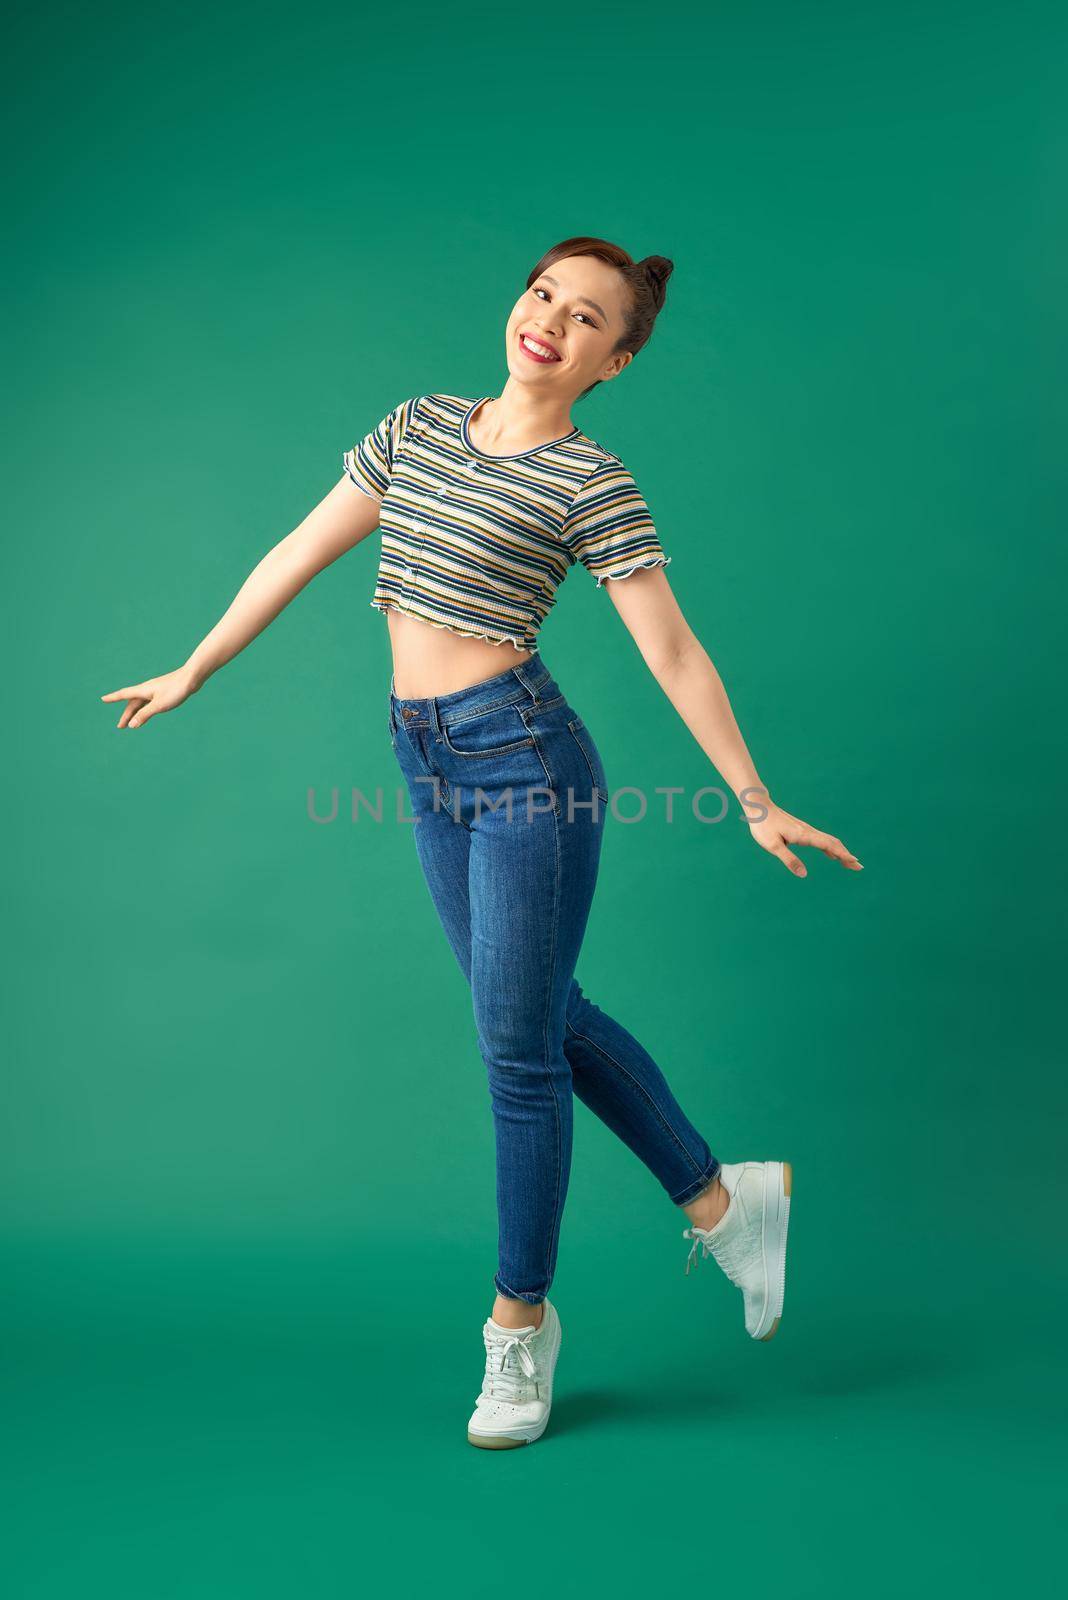 Full-length portrait of a joyful attractive Asian girl celebrating success while jumping over green background.